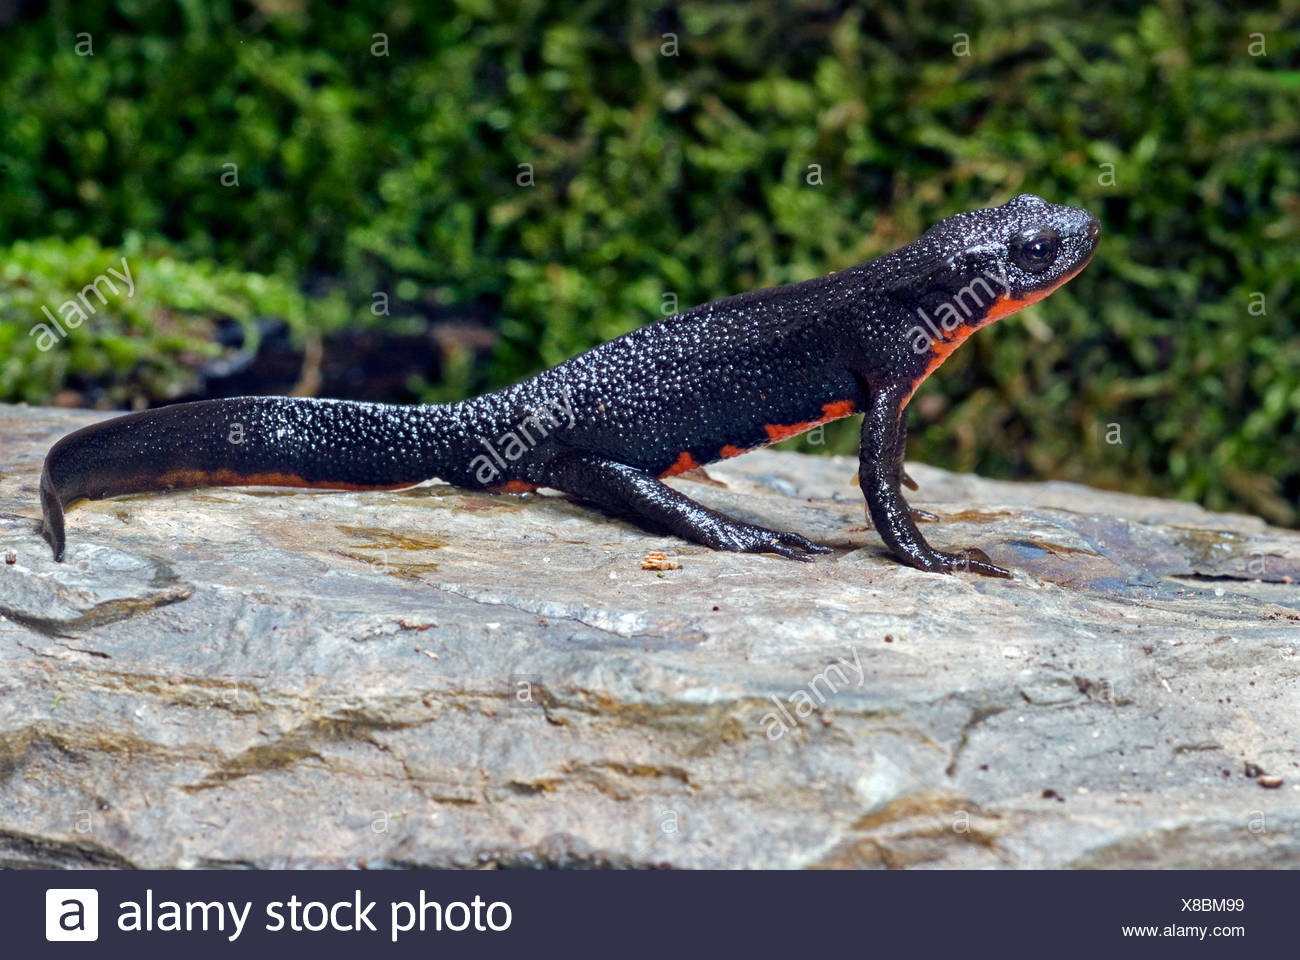 Japanese Firebelly Newt Japanese Fire Bellied Newt Cynops Pyrrhogaster On A Stone Stock Photo Alamy,Bamboo Floors Pros And Cons